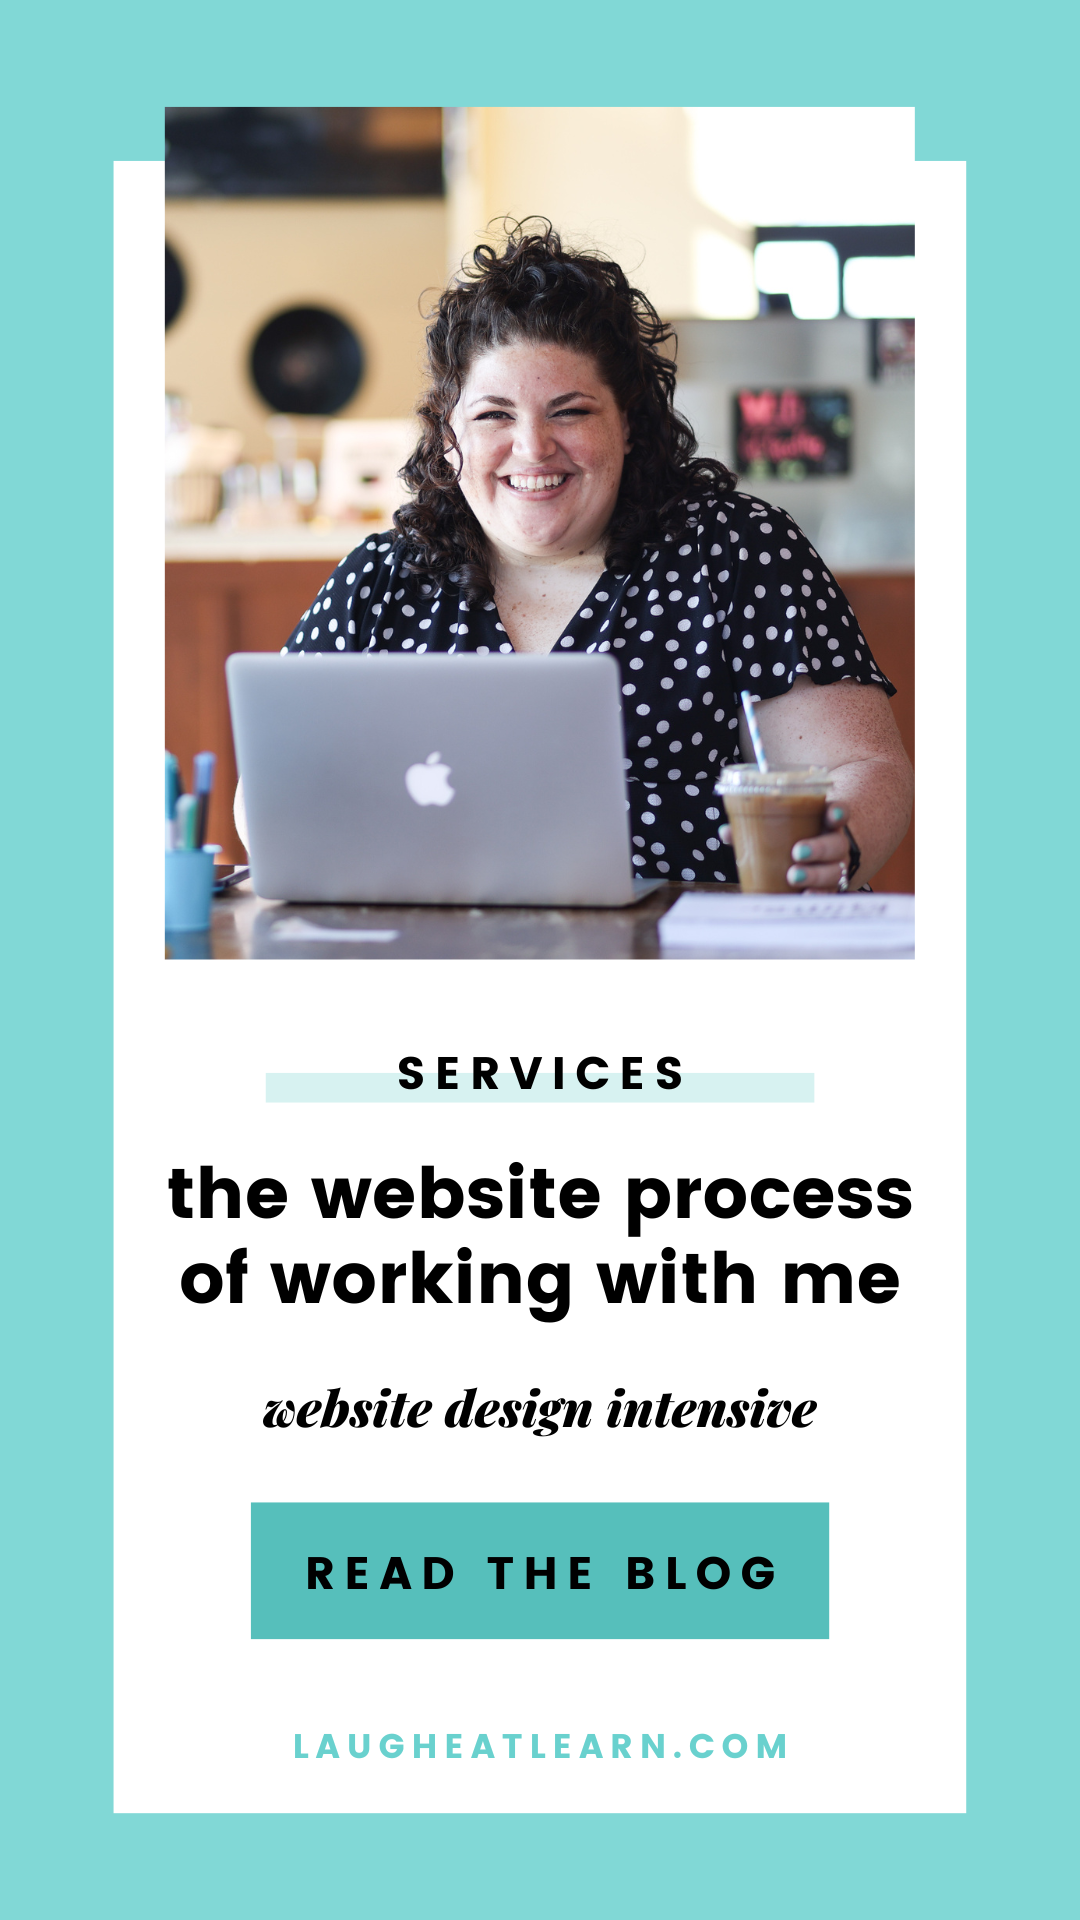 Want to hire a web designer for WordPress? Read the blog to learn about the process of working with me!